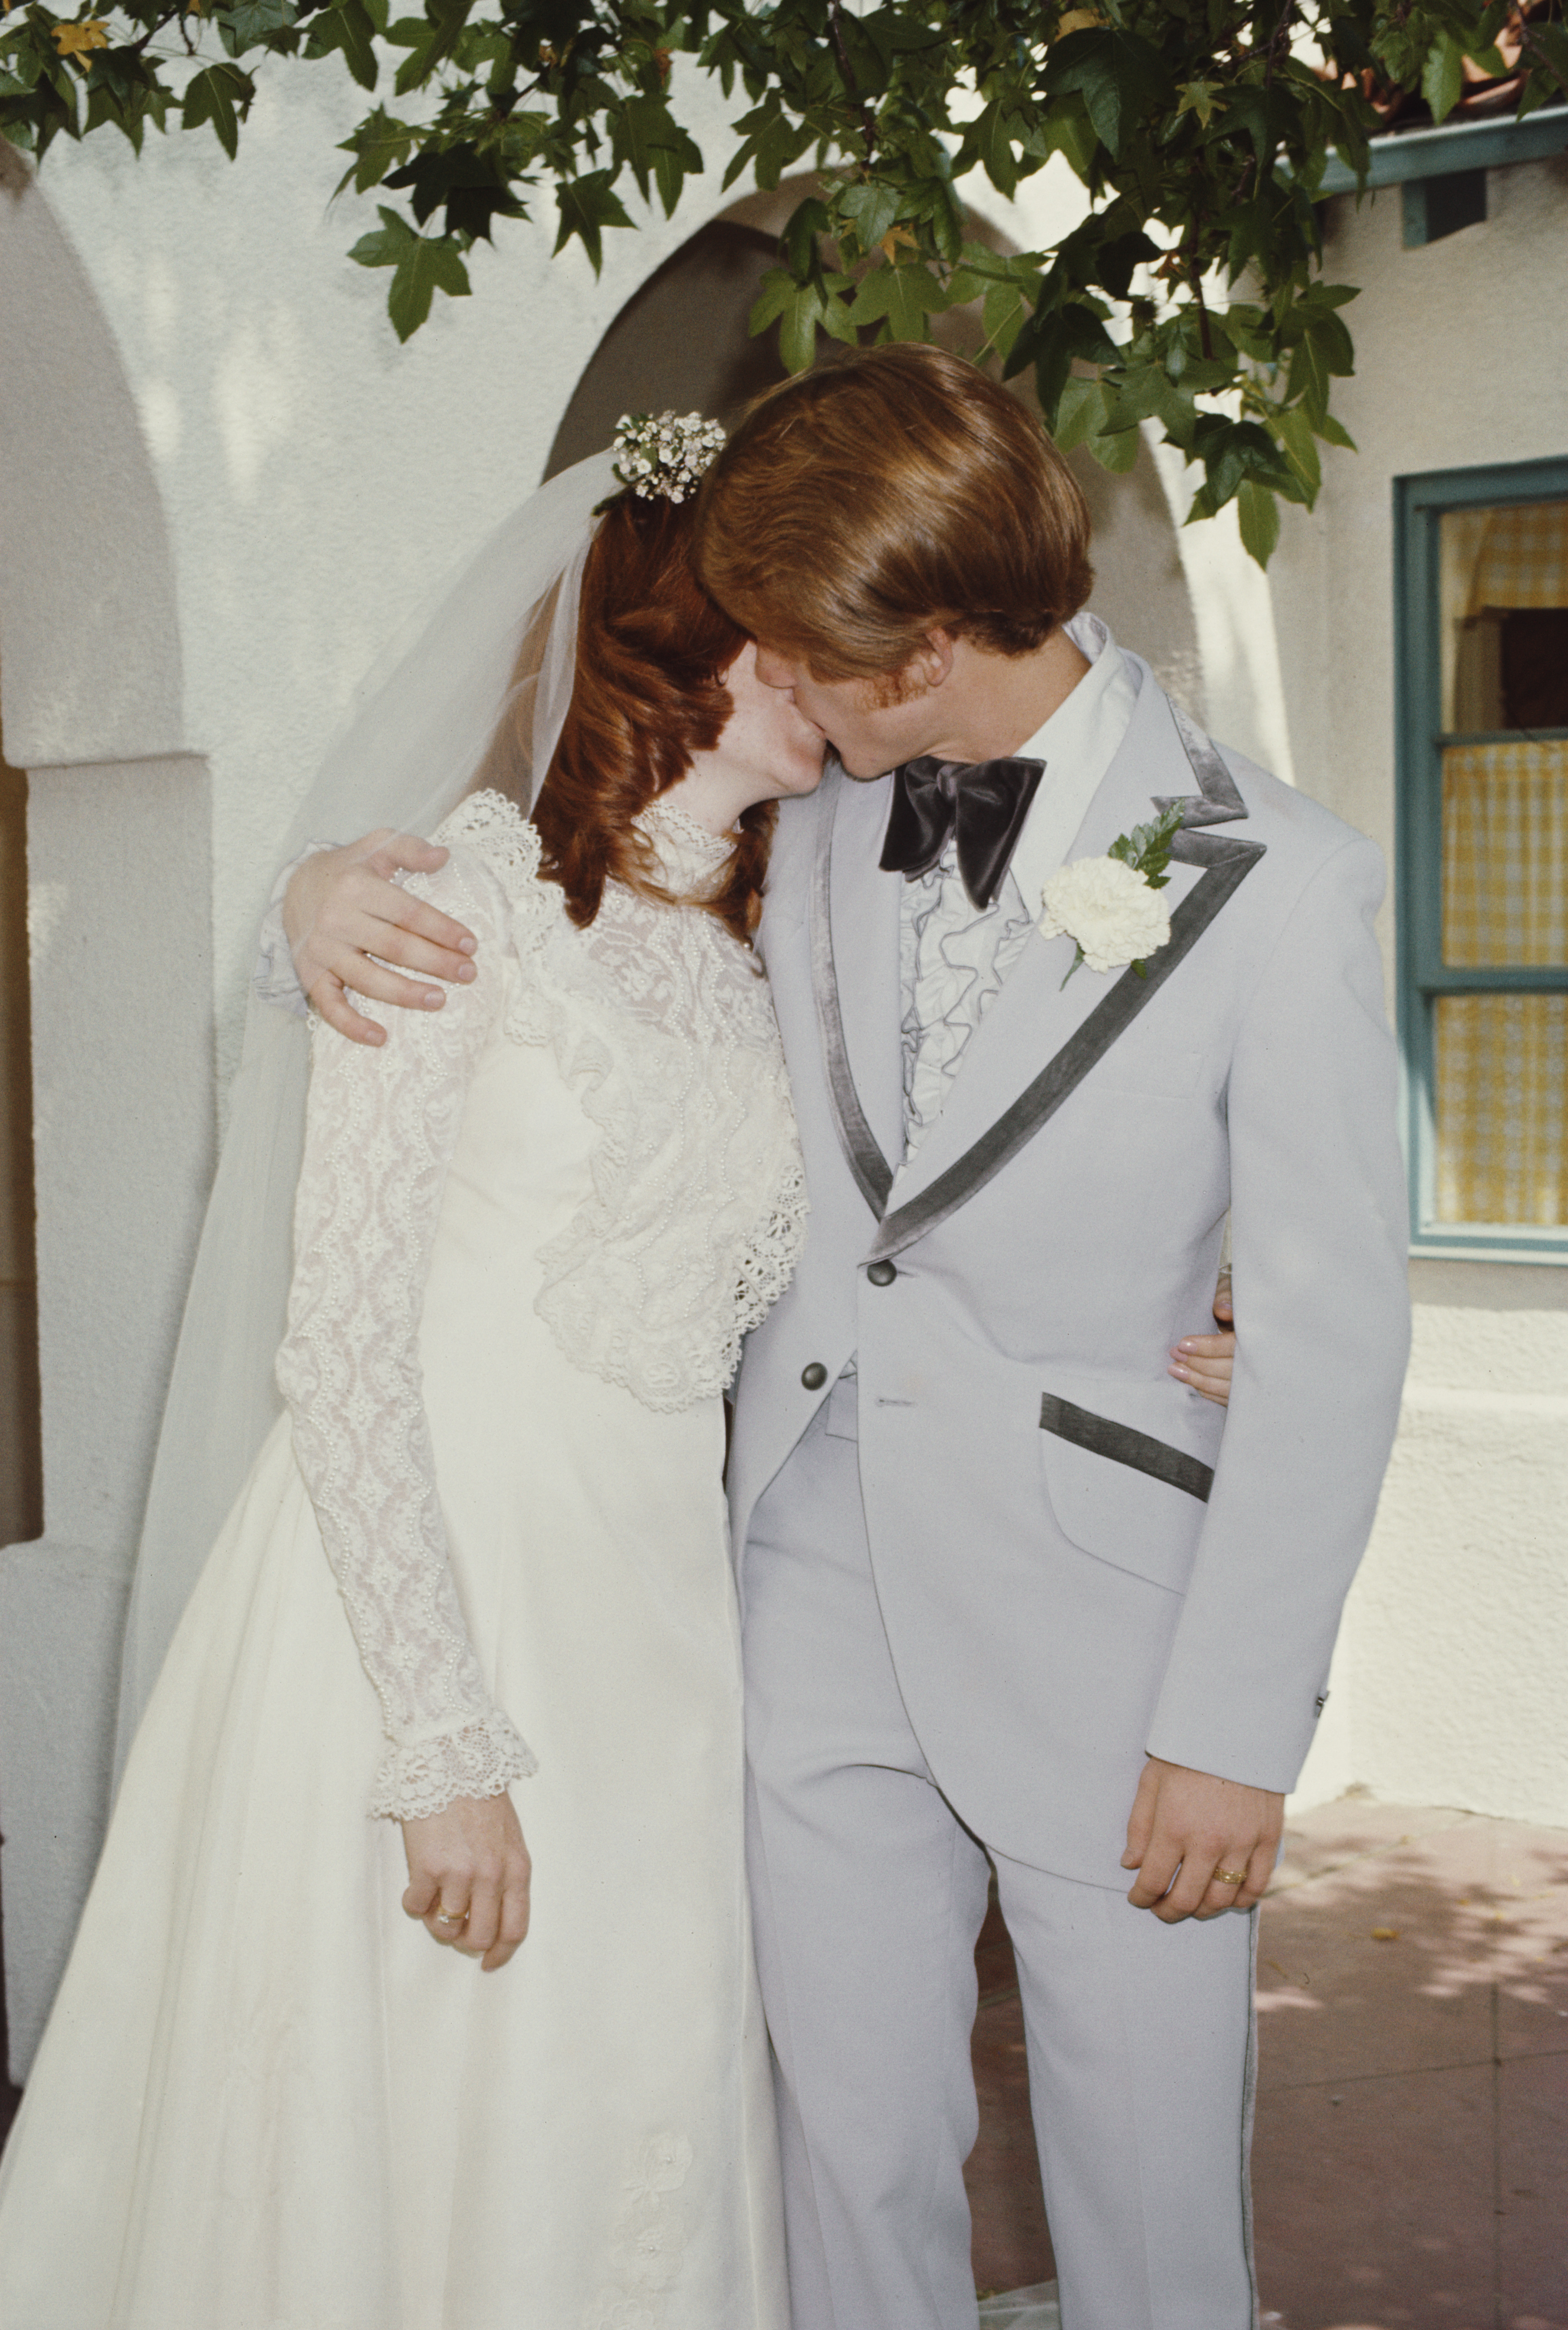 Ron Howard married Cheryl Alley at the Magnolia Park United Methodist Church in Burbank, California, on June 7, 1975 | Source: Getty Images